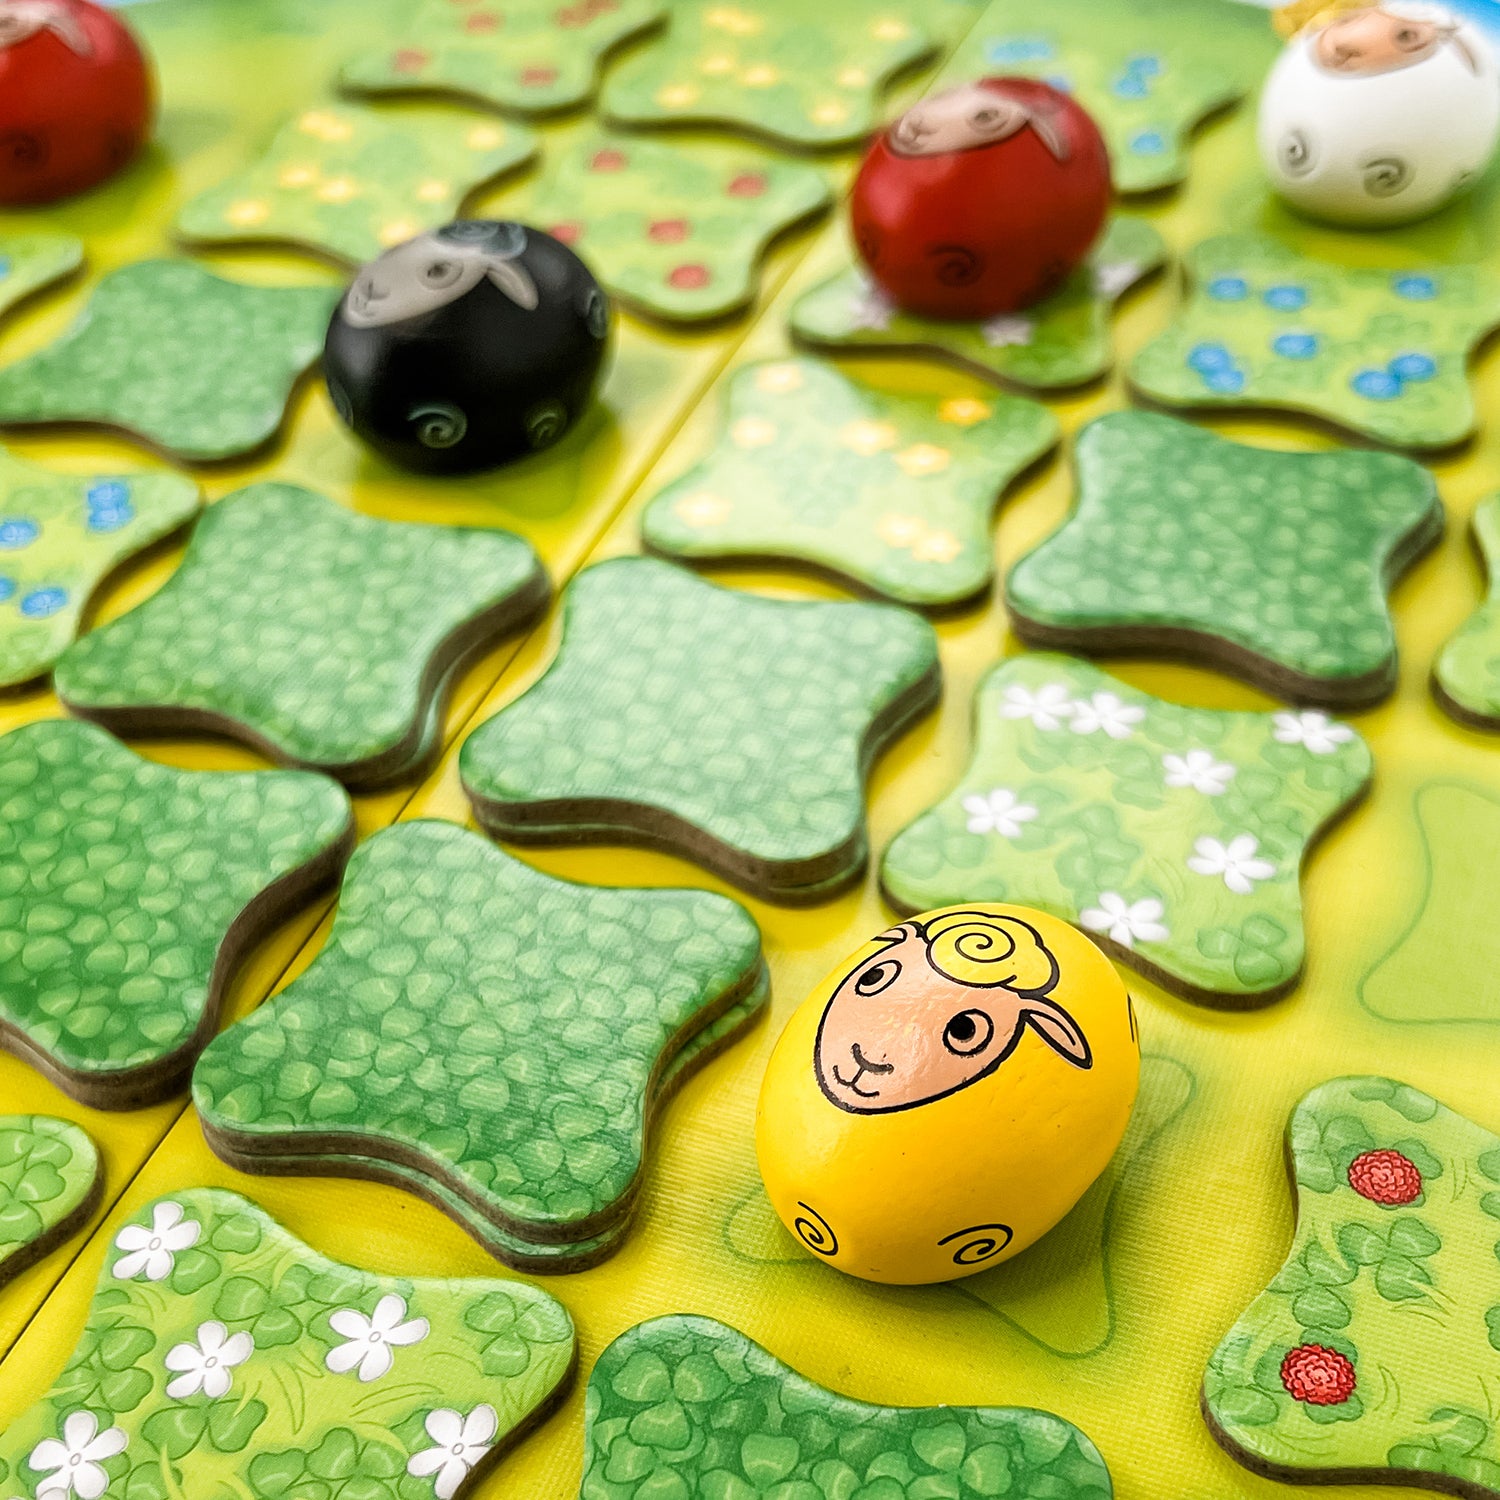 Live - So Clover! Board Game Overview